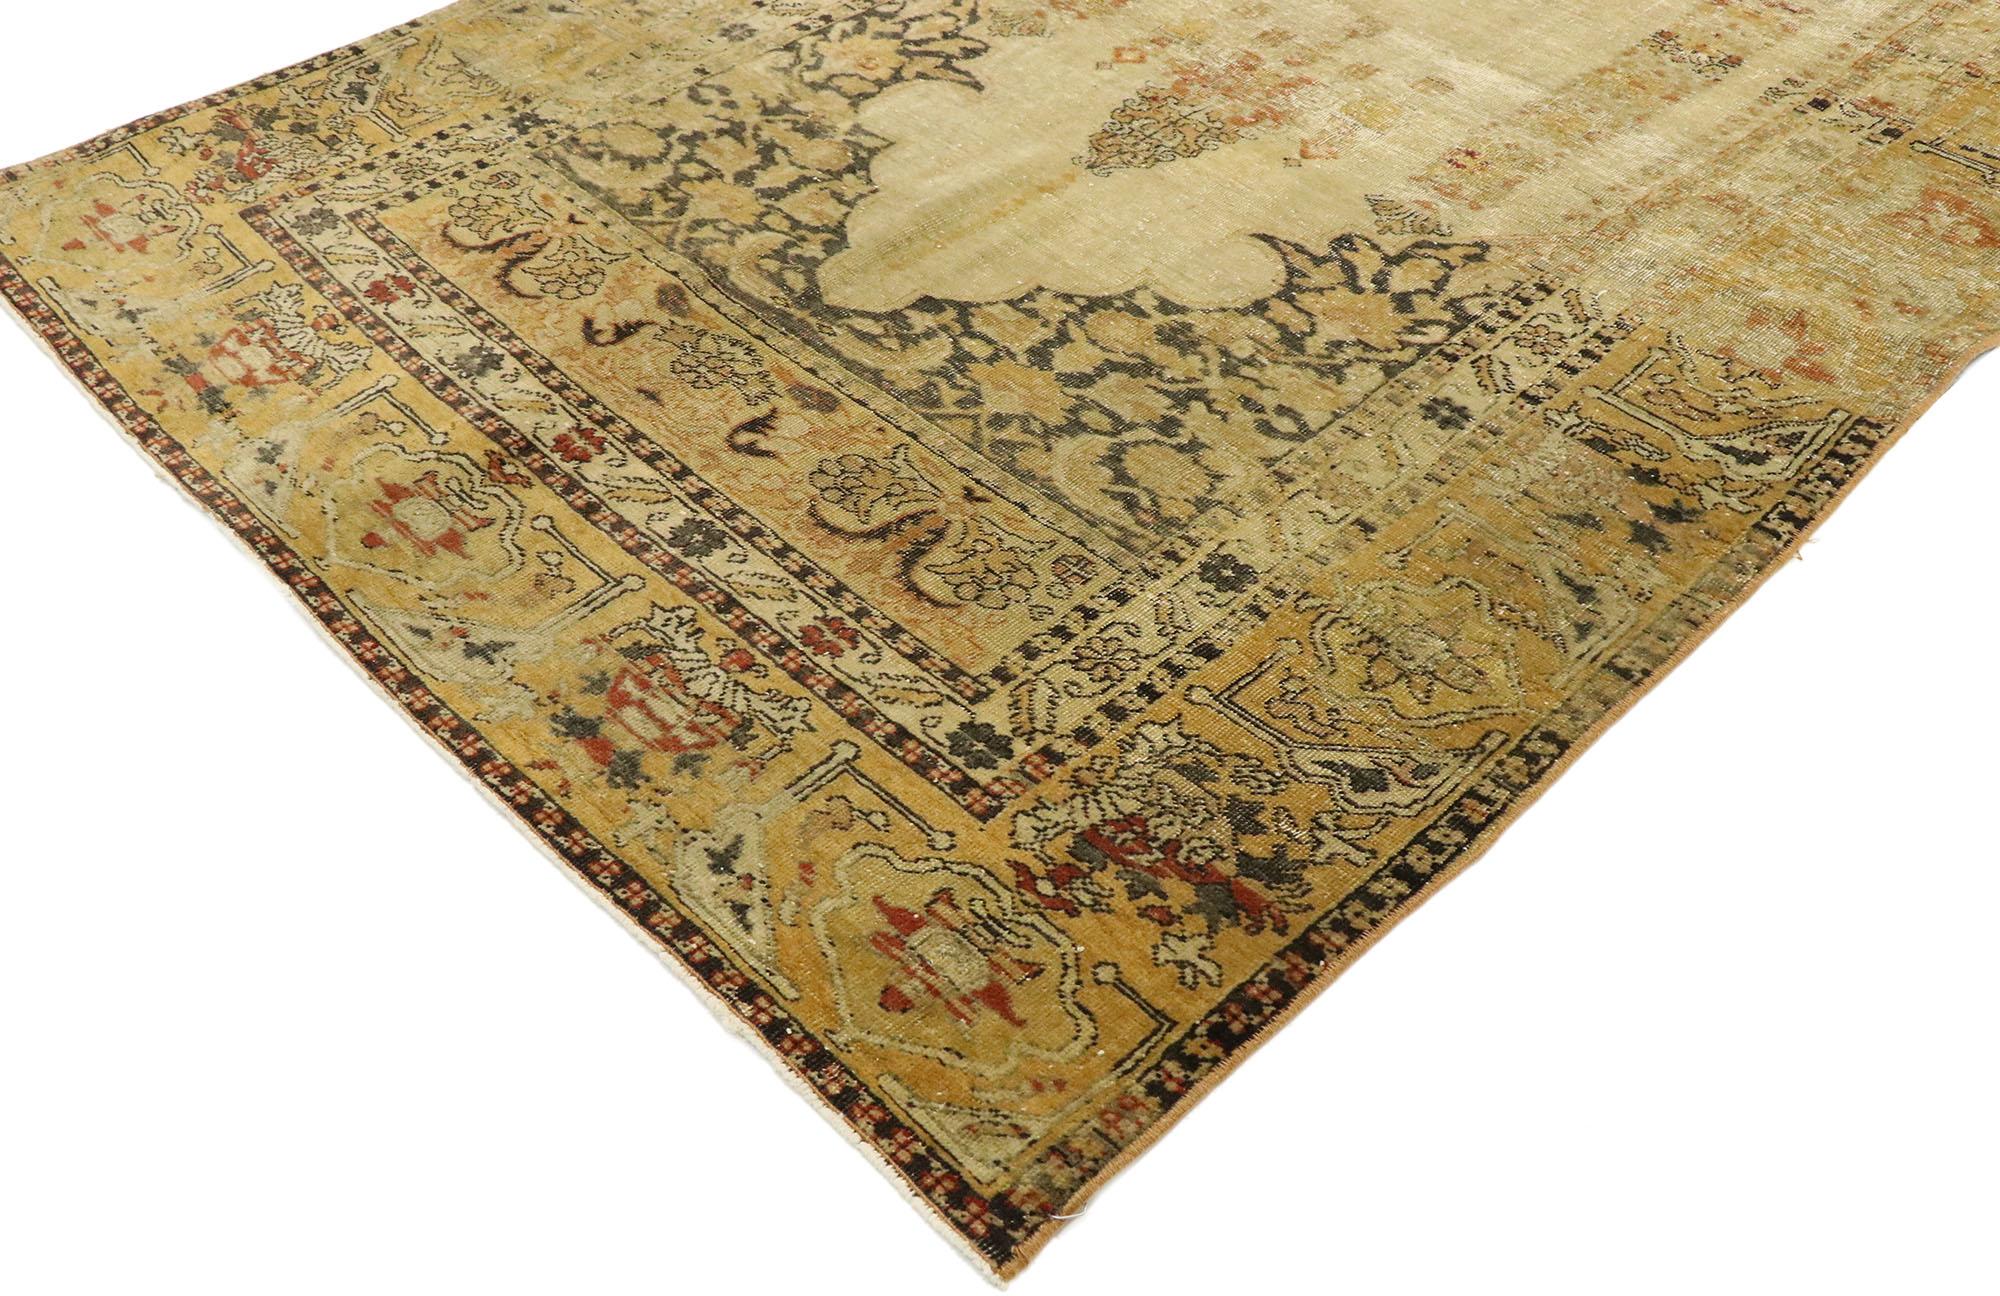 53104 distressed vintage Turkish Oushak Prayer rug with Modern Rustic Artisan style. Immersed in Anatolian history and warm colors, this hand knotted wool distressed vintage Turkish Oushak prayer rug beautifully combines sophistication with rugged